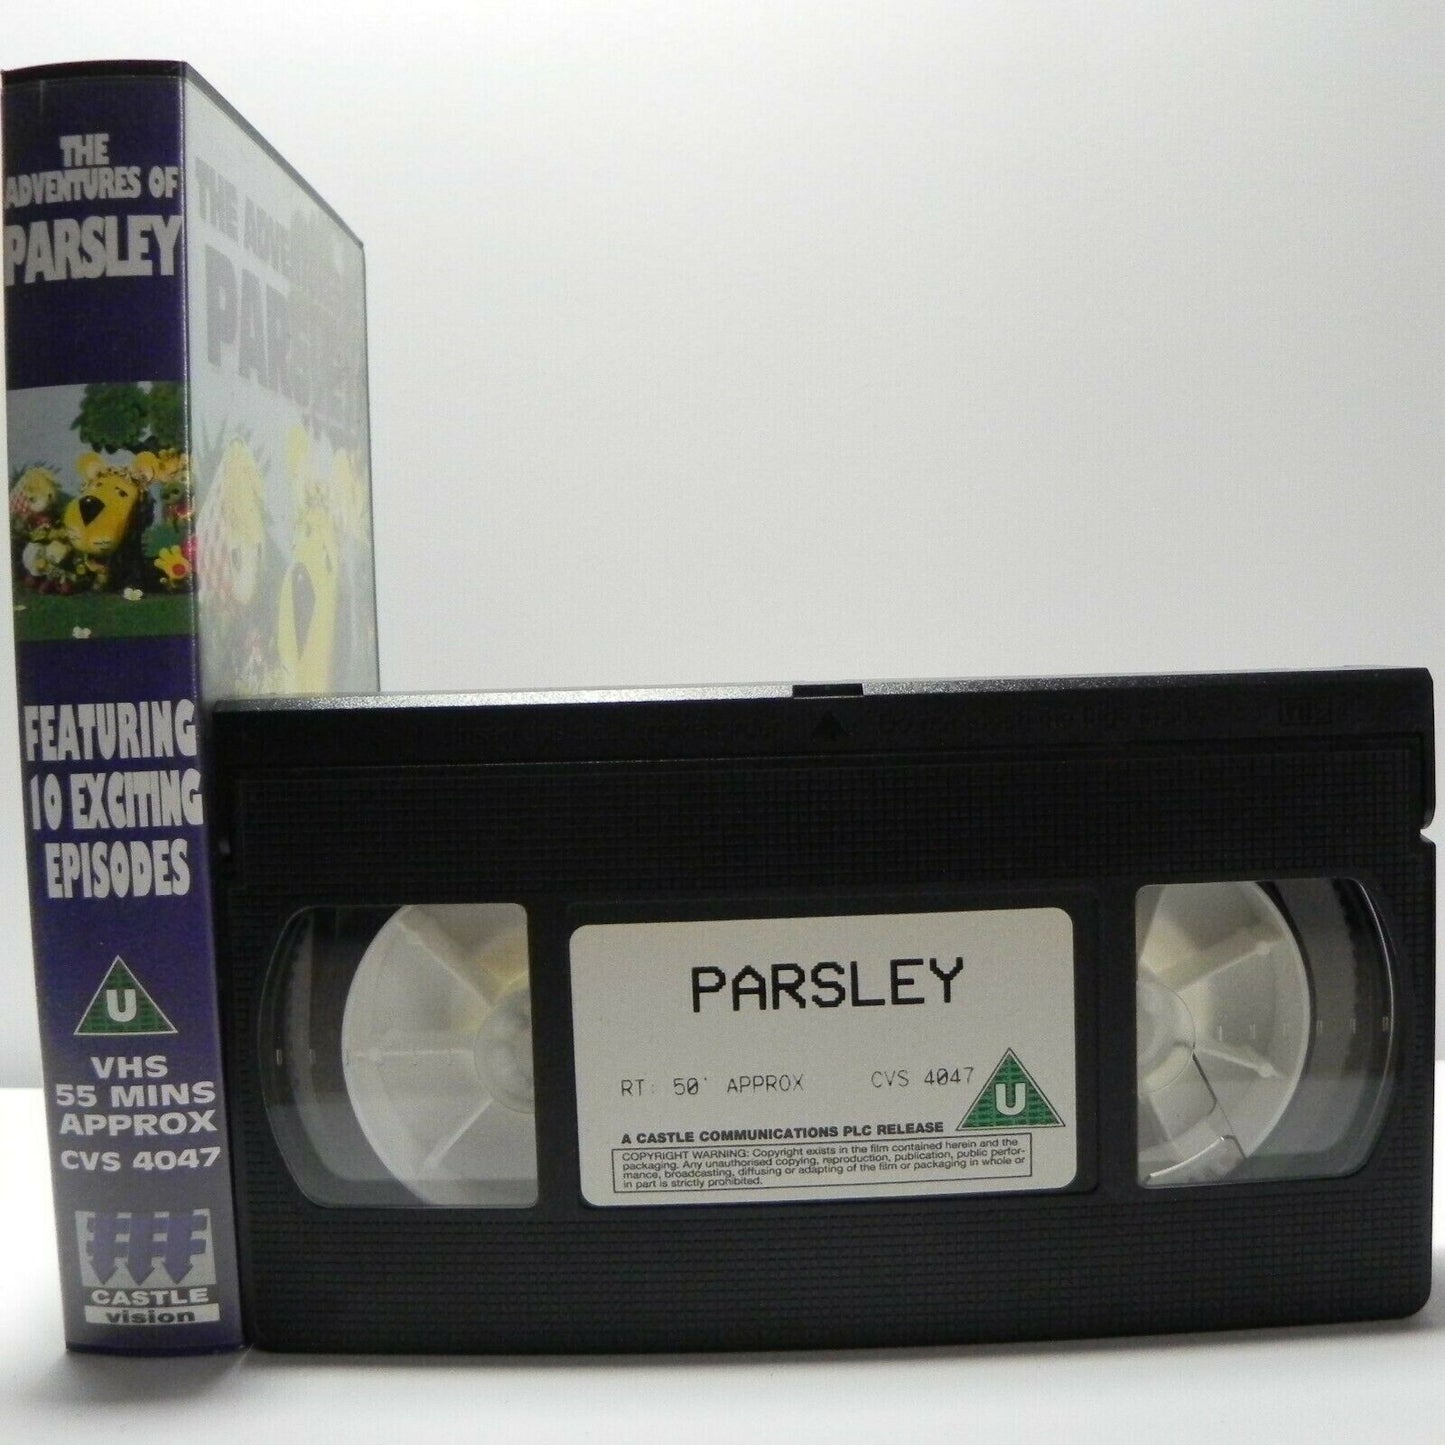 The Adventures Of Parsley - Friendly Lion - Animated - Children's - Pal VHS-